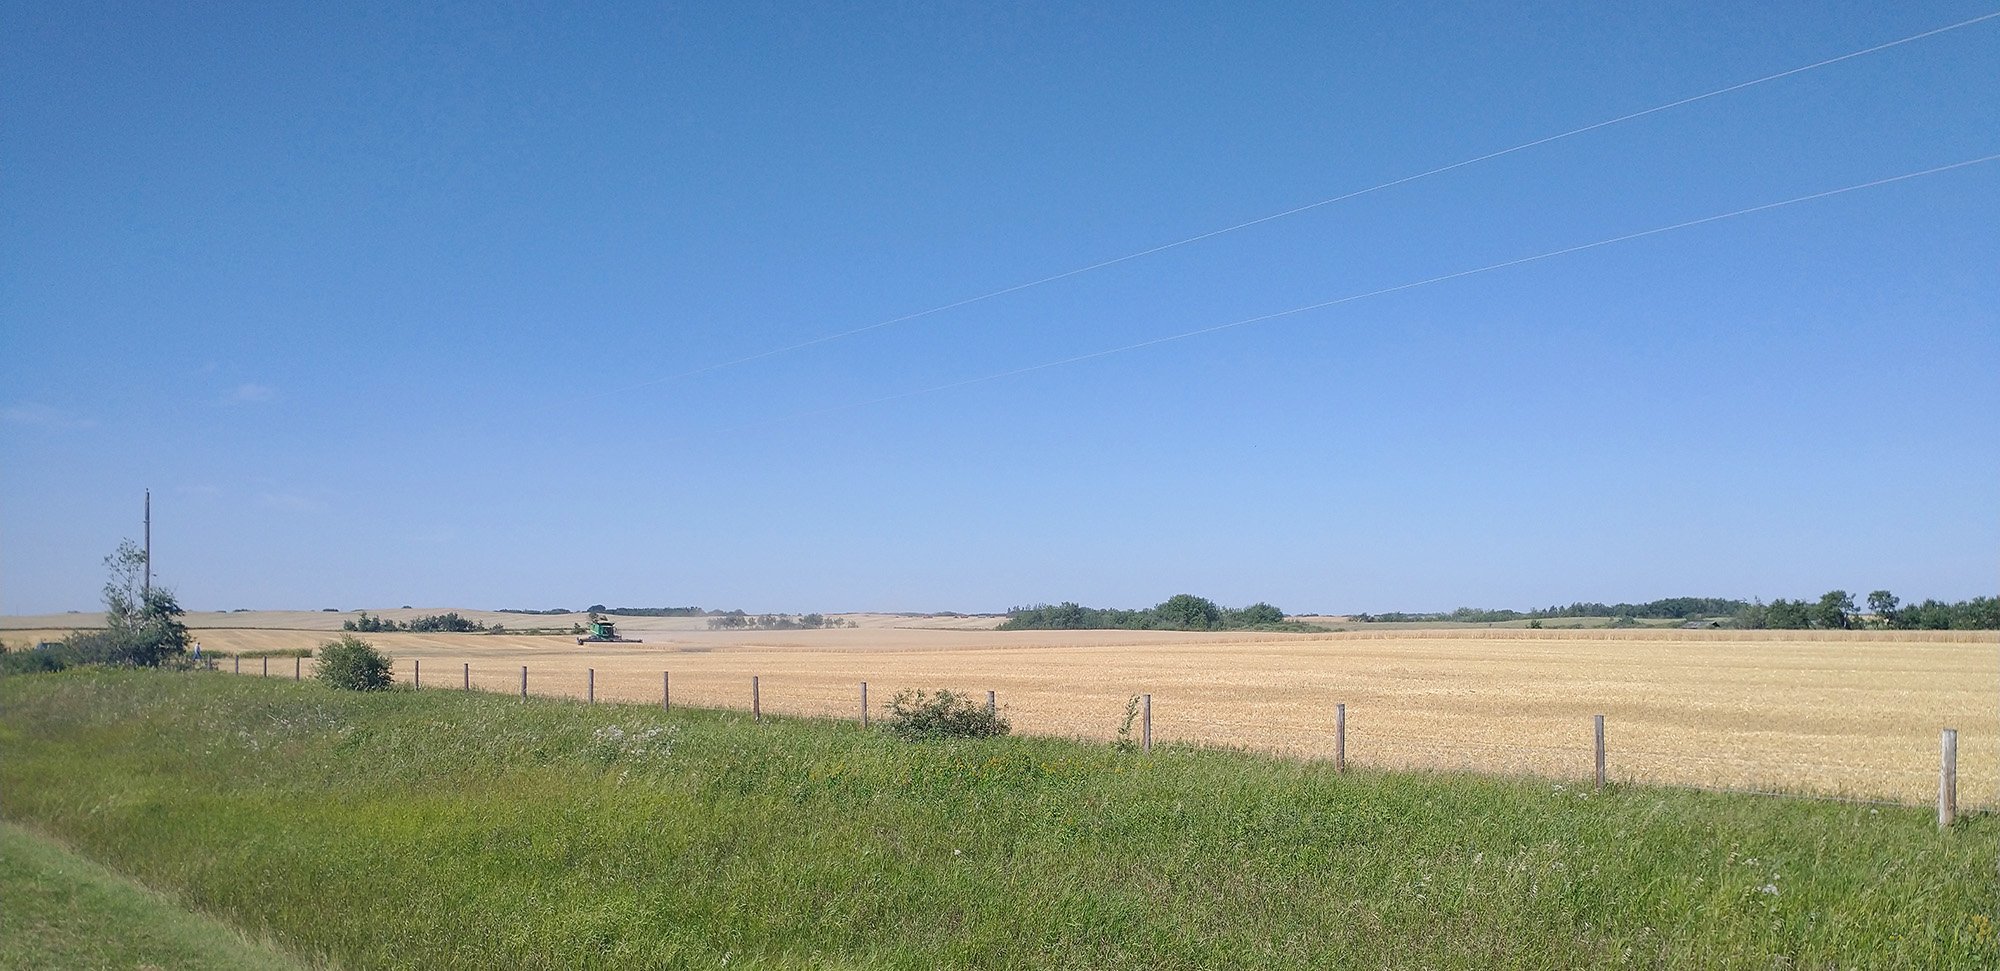 Scenery on the ride. Just fields during harvest.